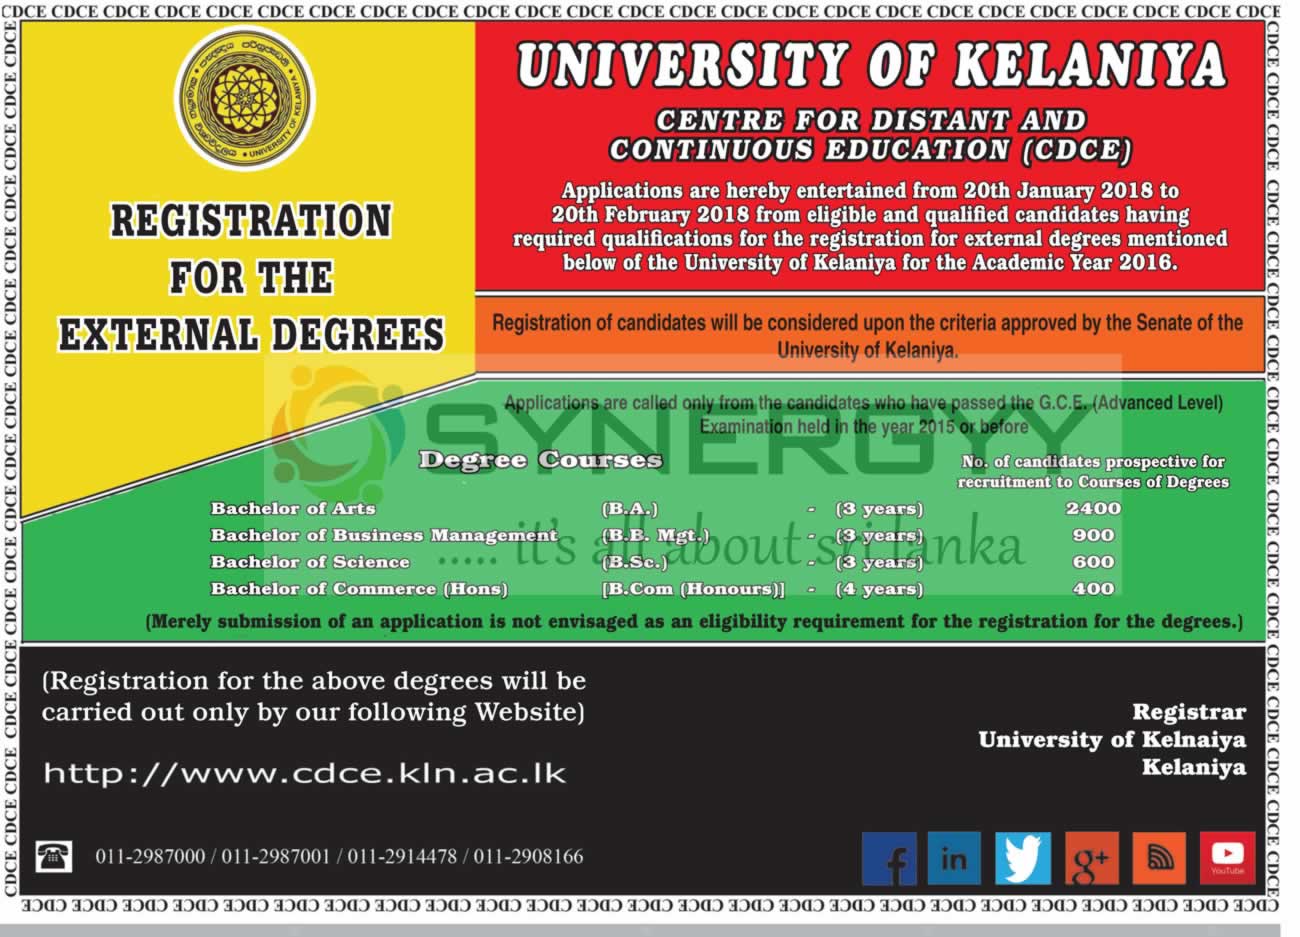 University of Kelaniya – Centre for Distant and Continuous Education (CDCE) External Degree Programme – Application calls now